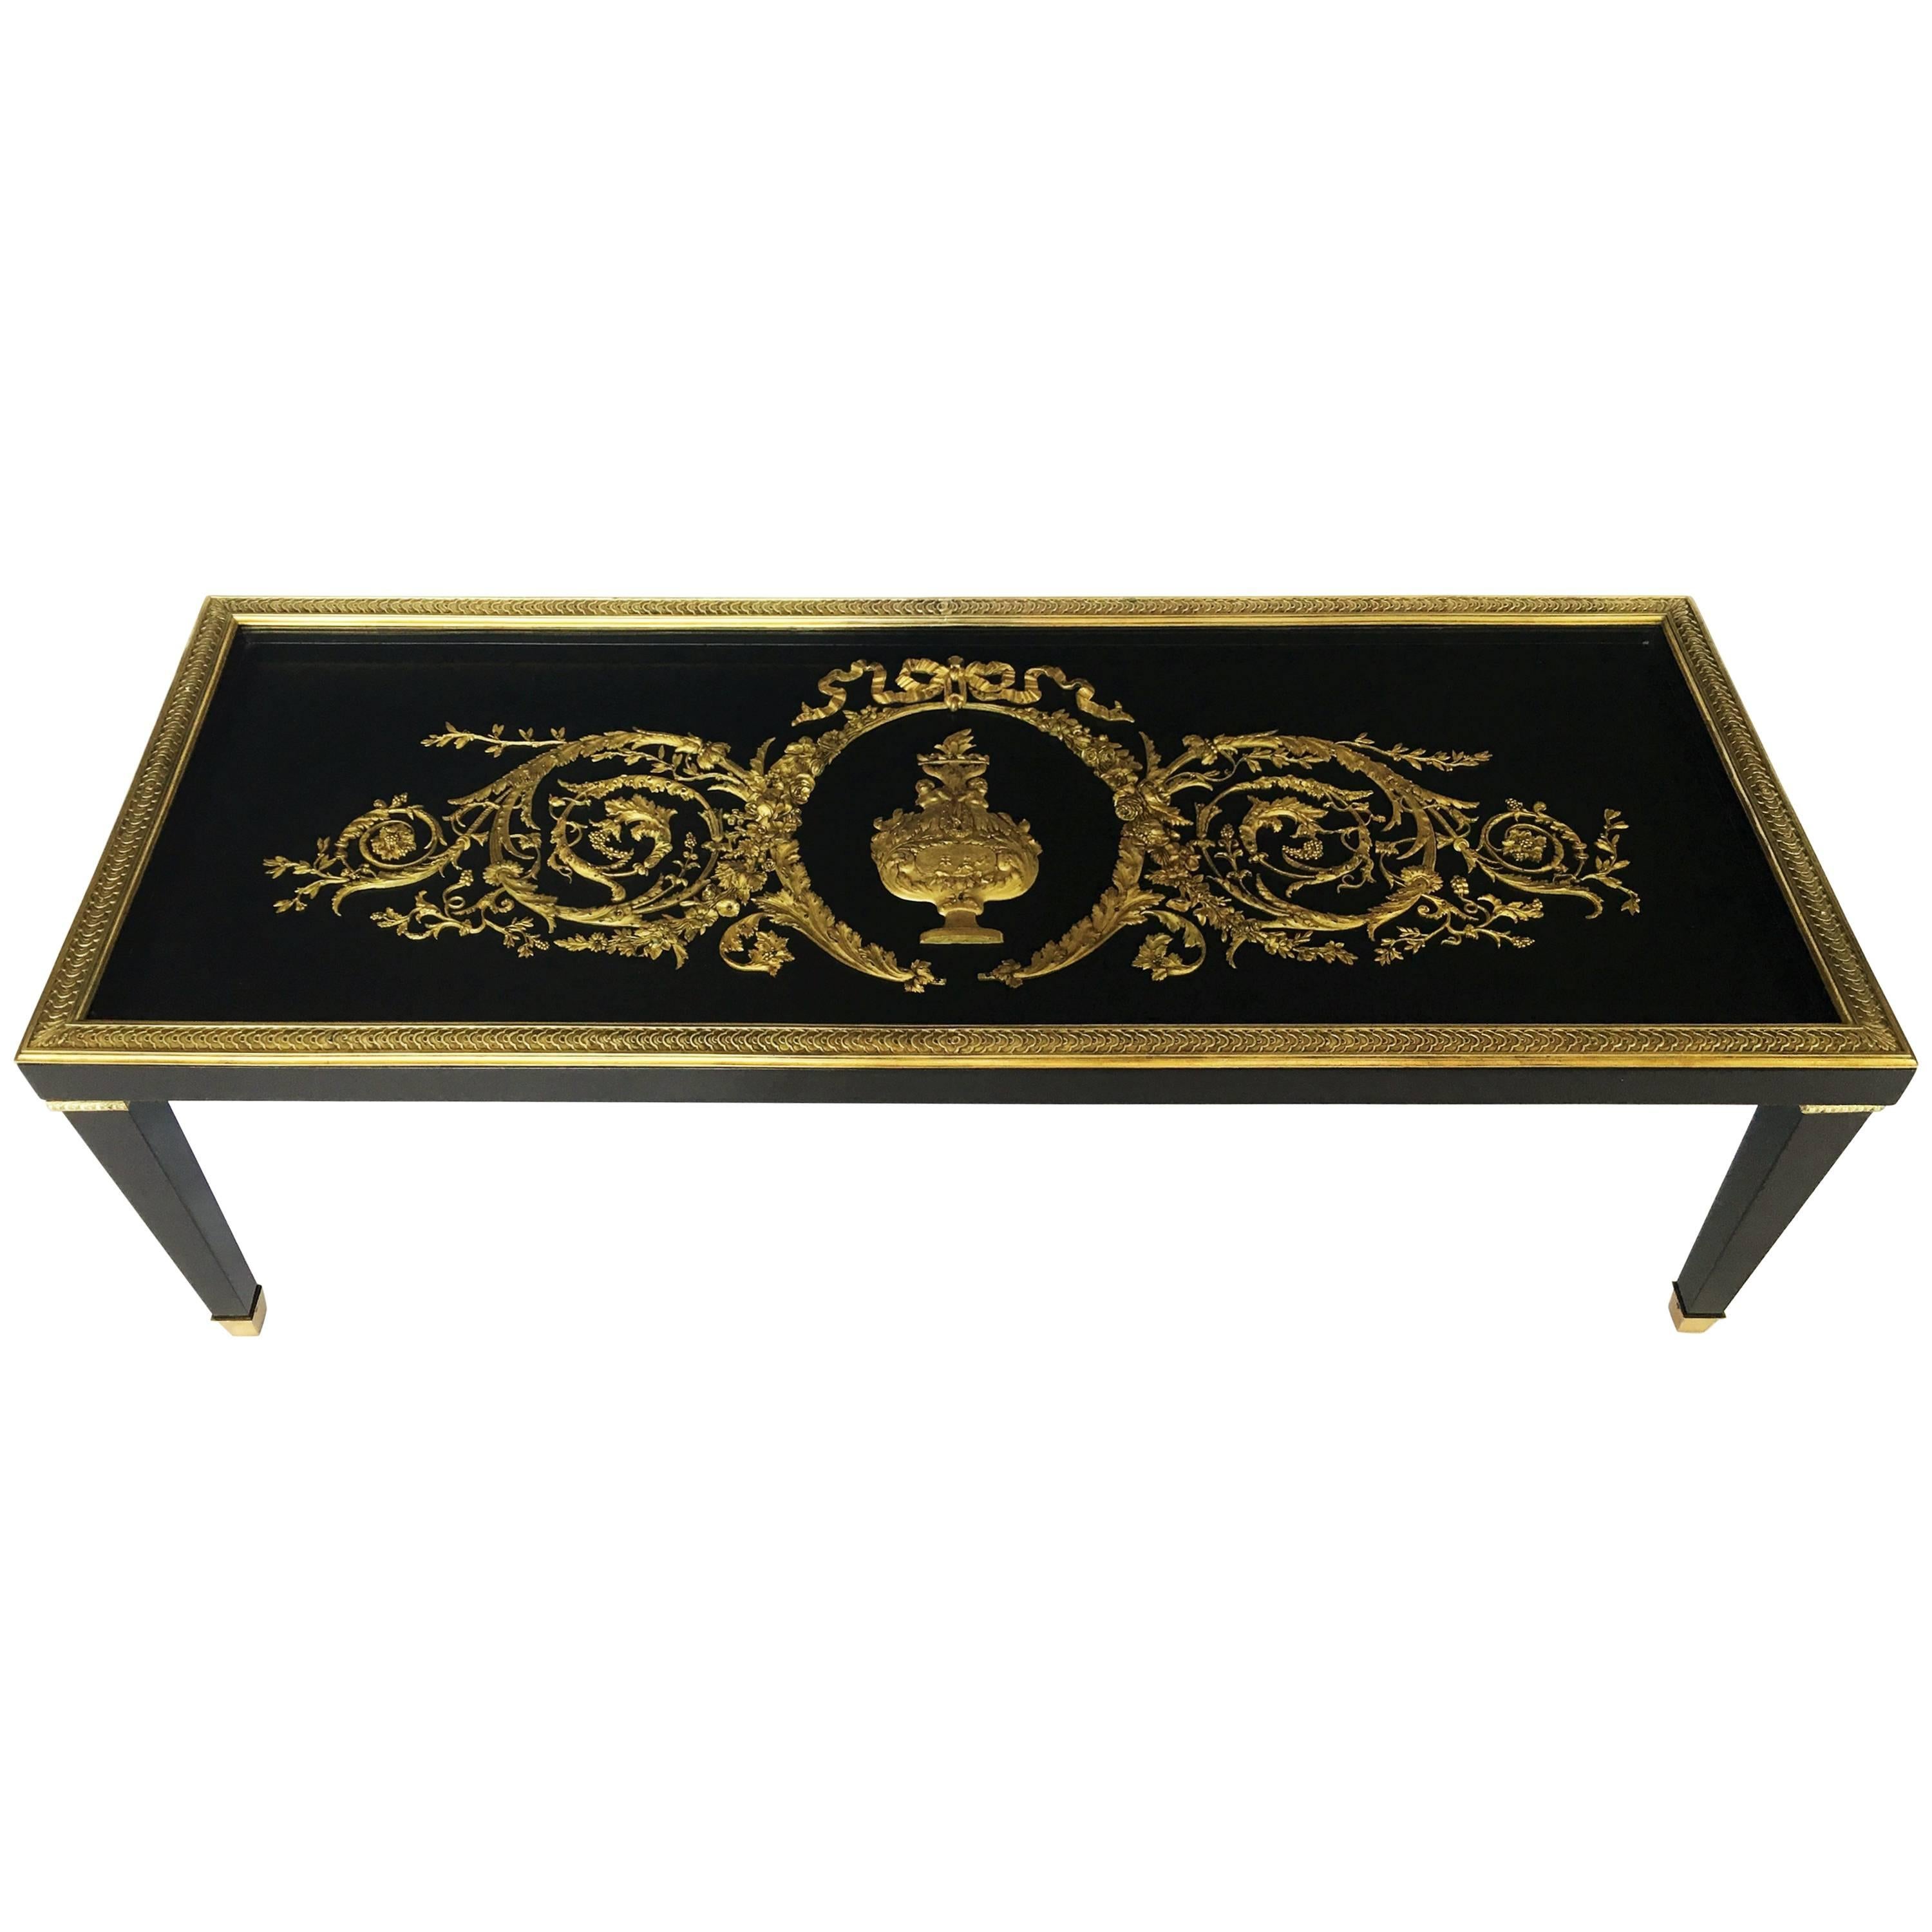 Regency Ebonized, Glass and Gilt Mounted Centre Table Attributed to Beurdeley For Sale